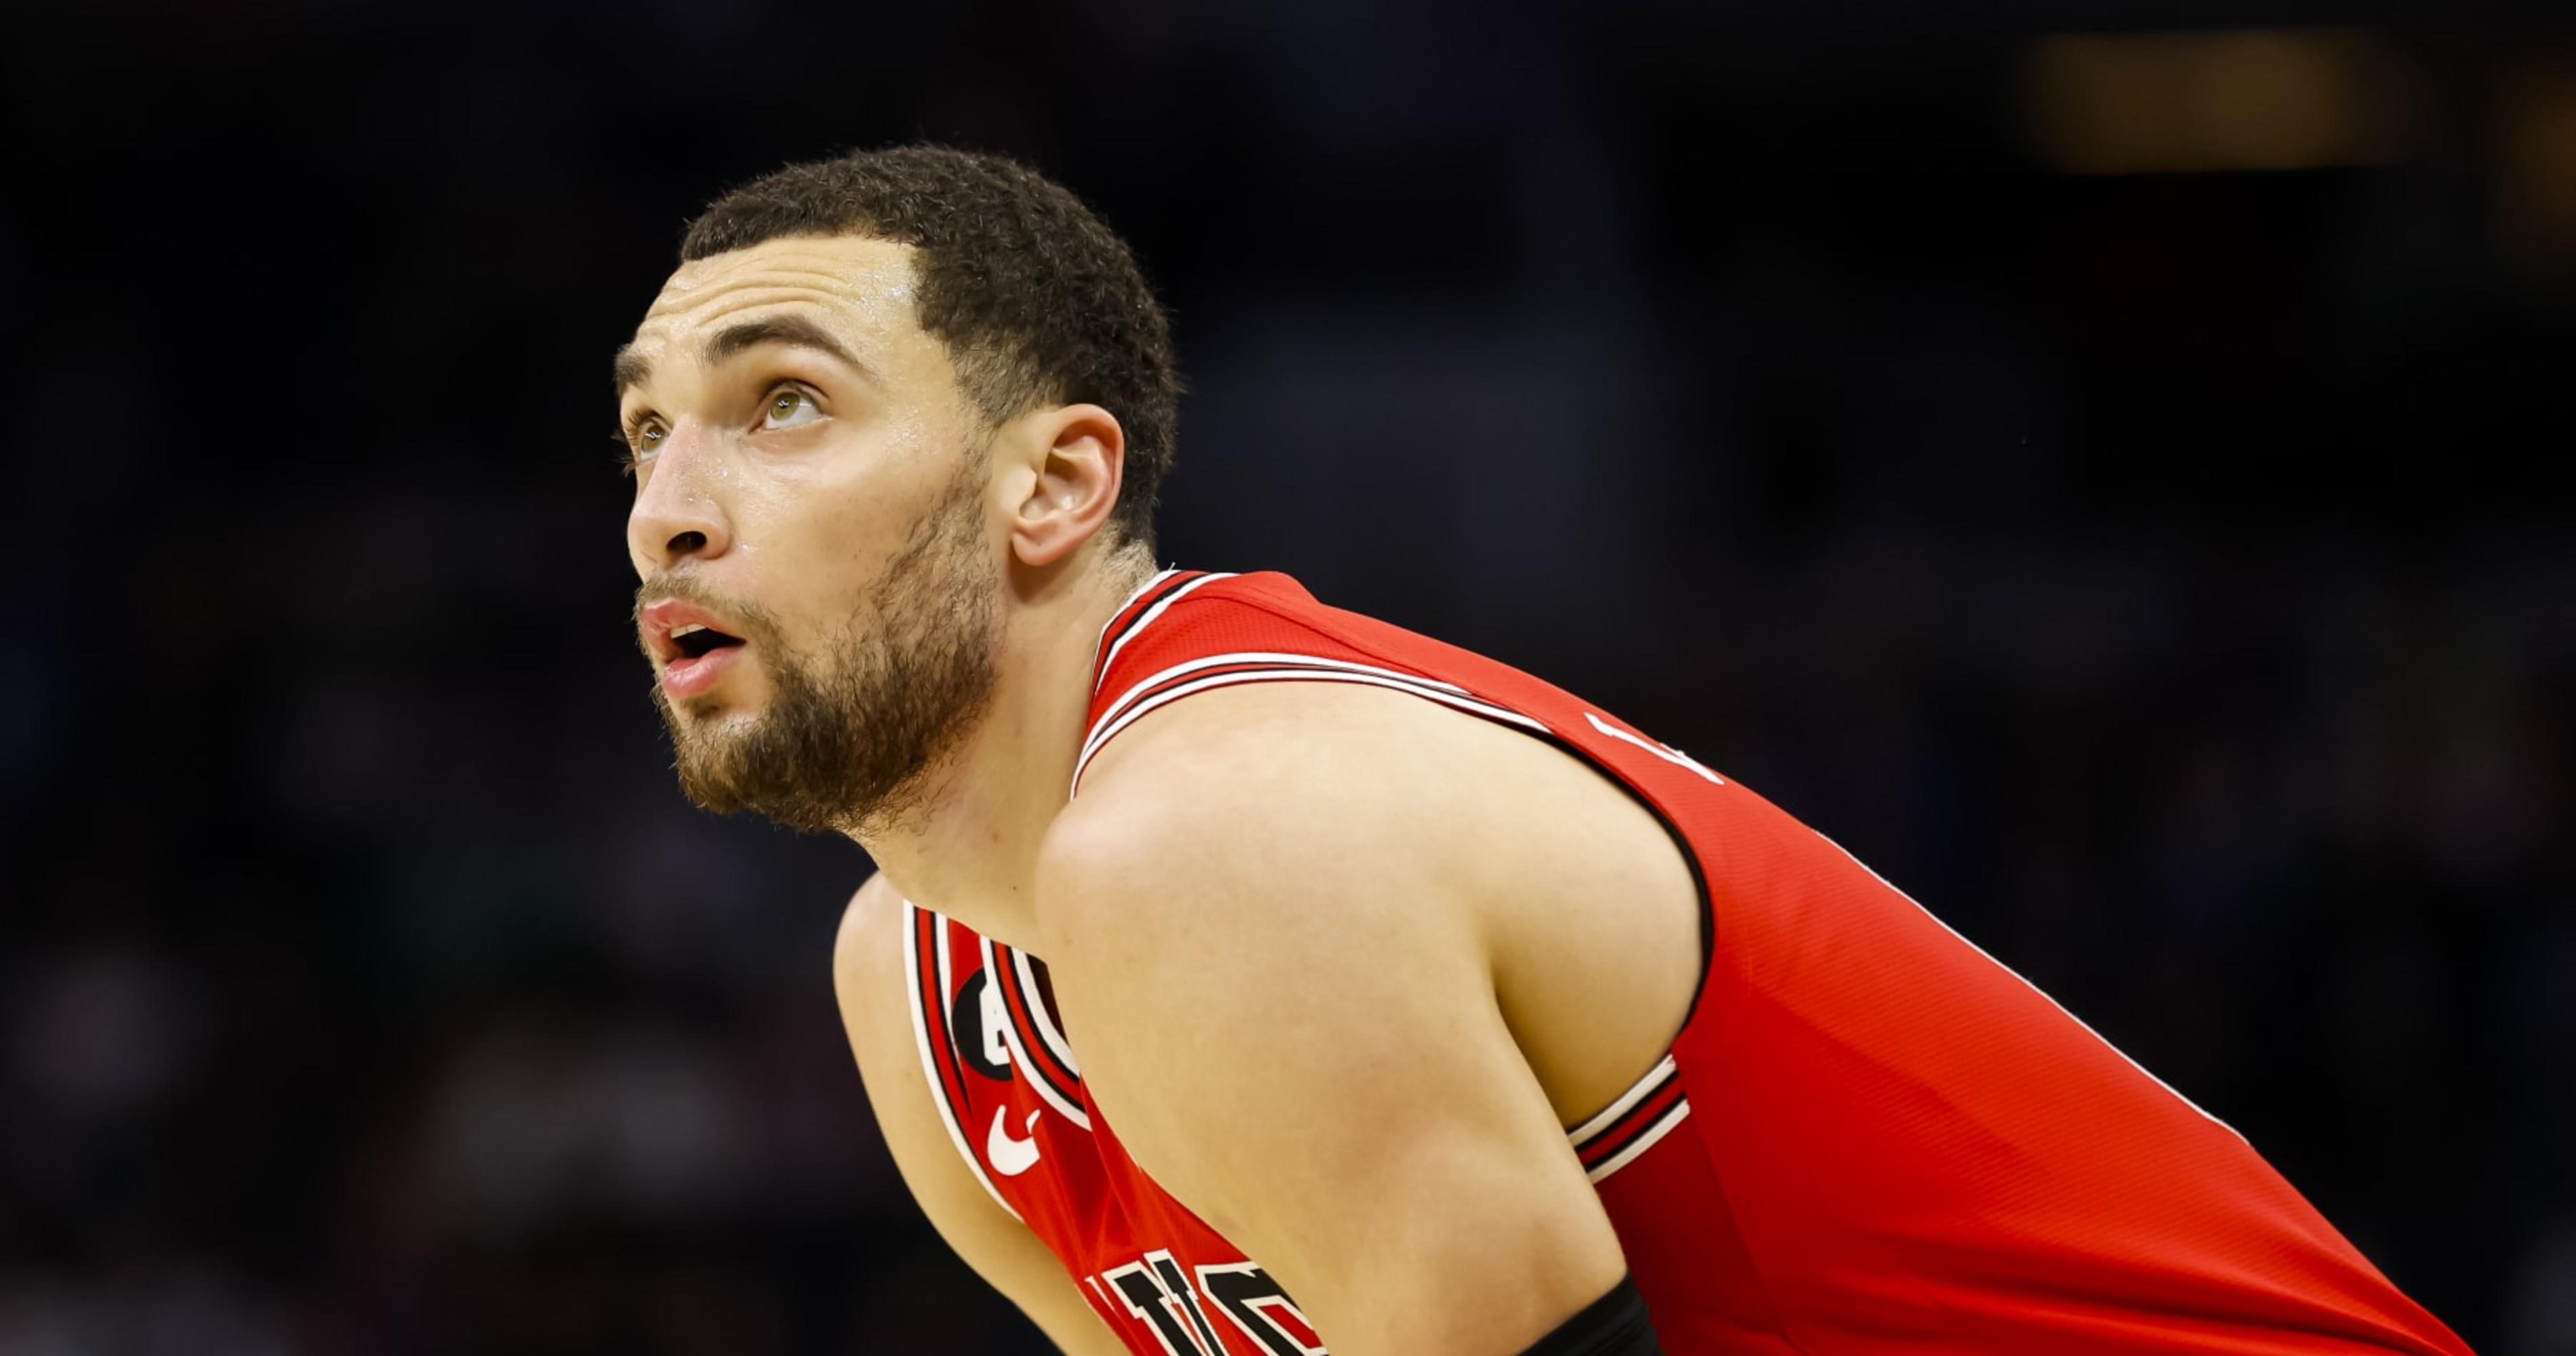 The Low-Risk, High-Reward Trade For The Lakers: Zach LaVine